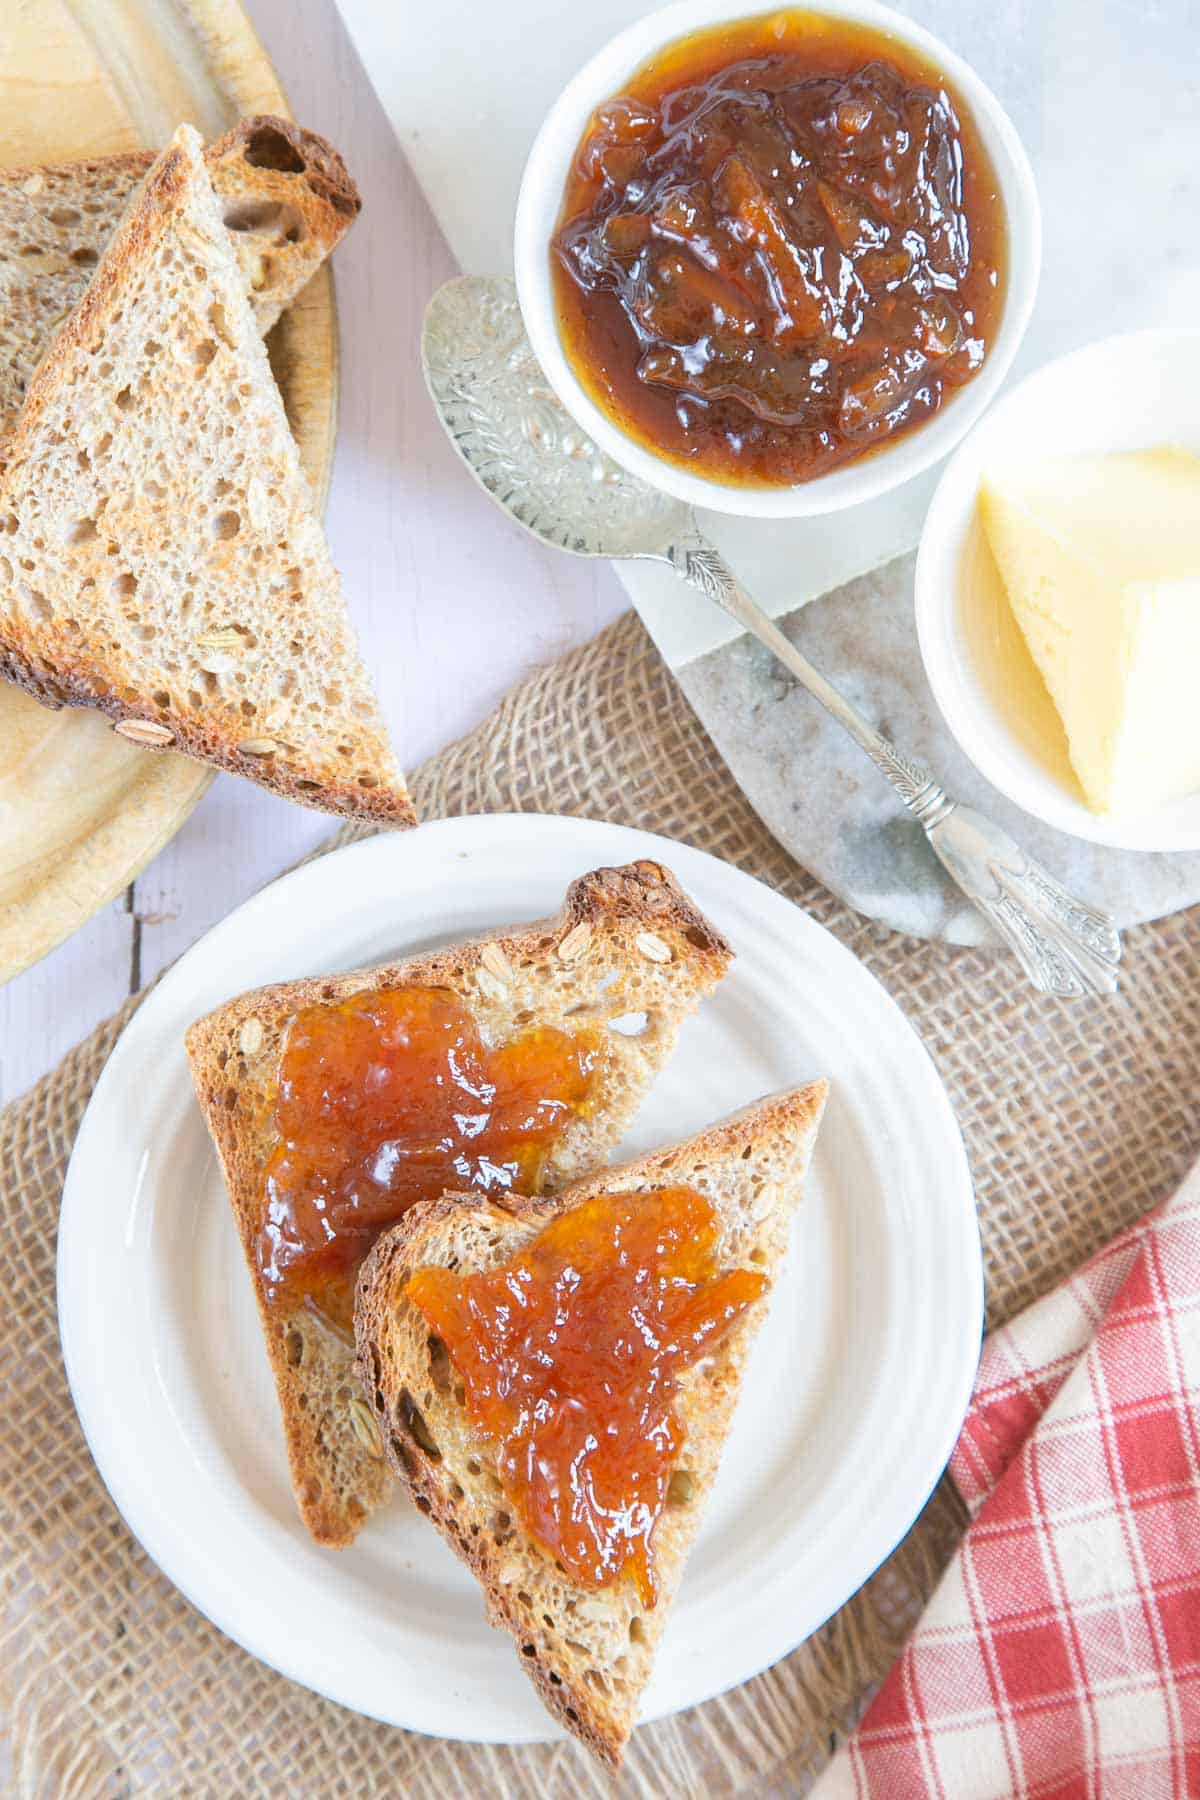 In close up, toast spread thickly with orange marmalade. More toast and marmalade are next to the two slices.